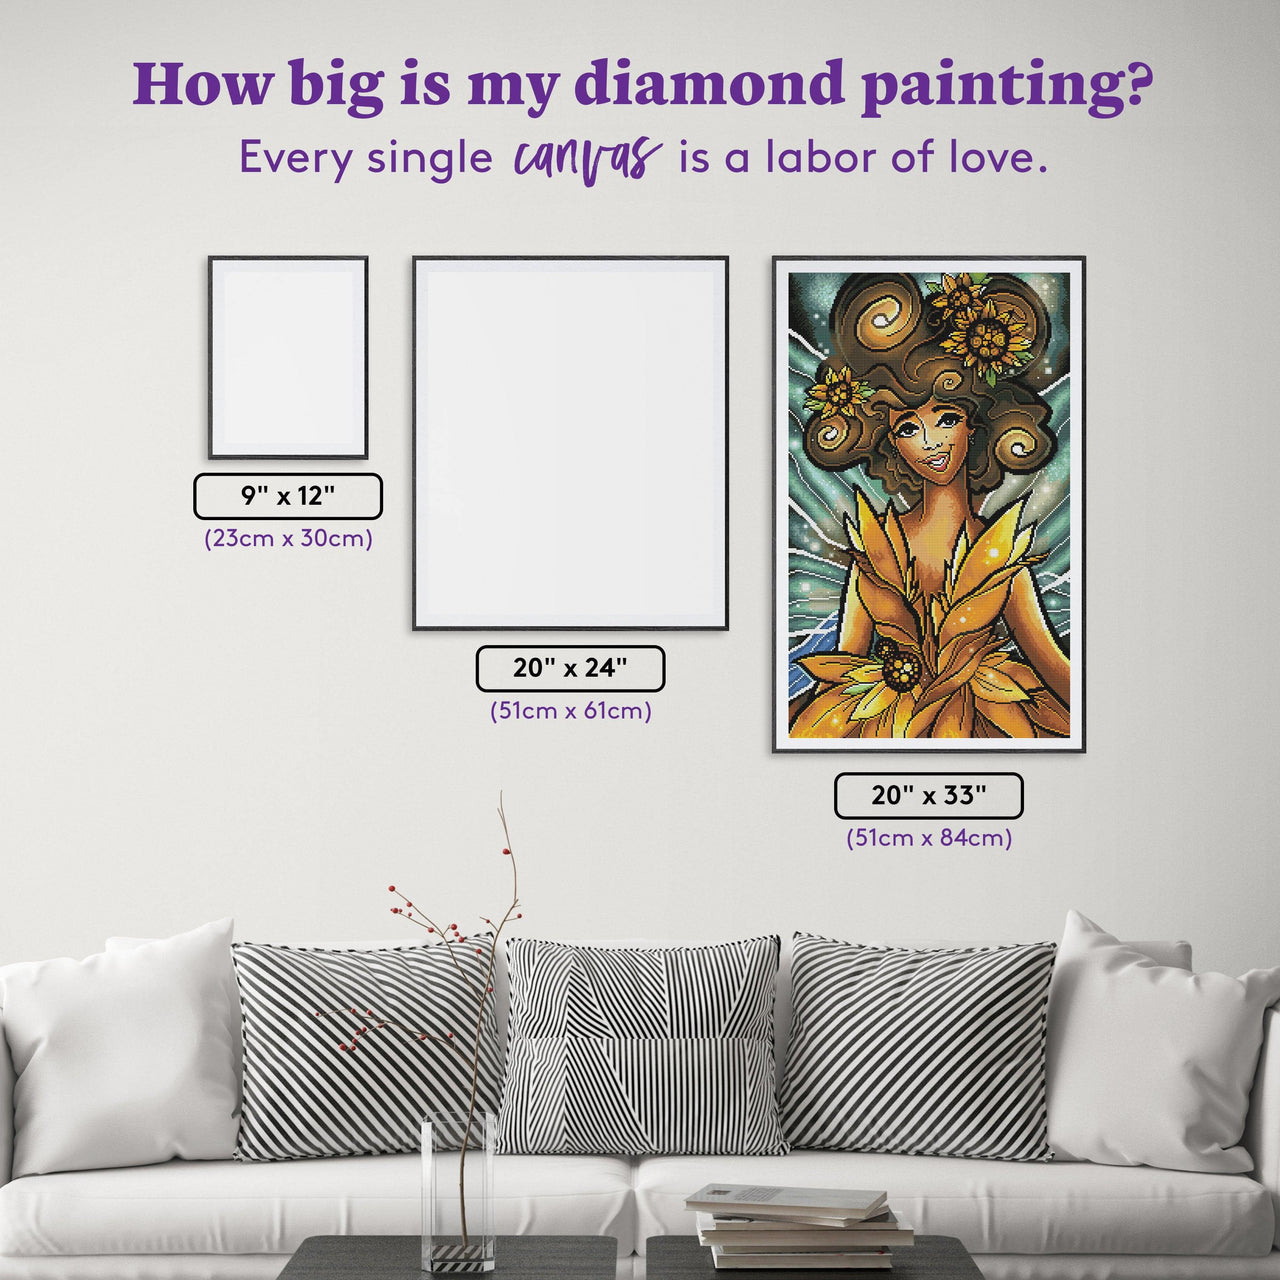 Diamond Painting The Light Bearer 20" x 33" (51cm x 84cm) / Round with 47 Colors including 4 ABs / 54,119